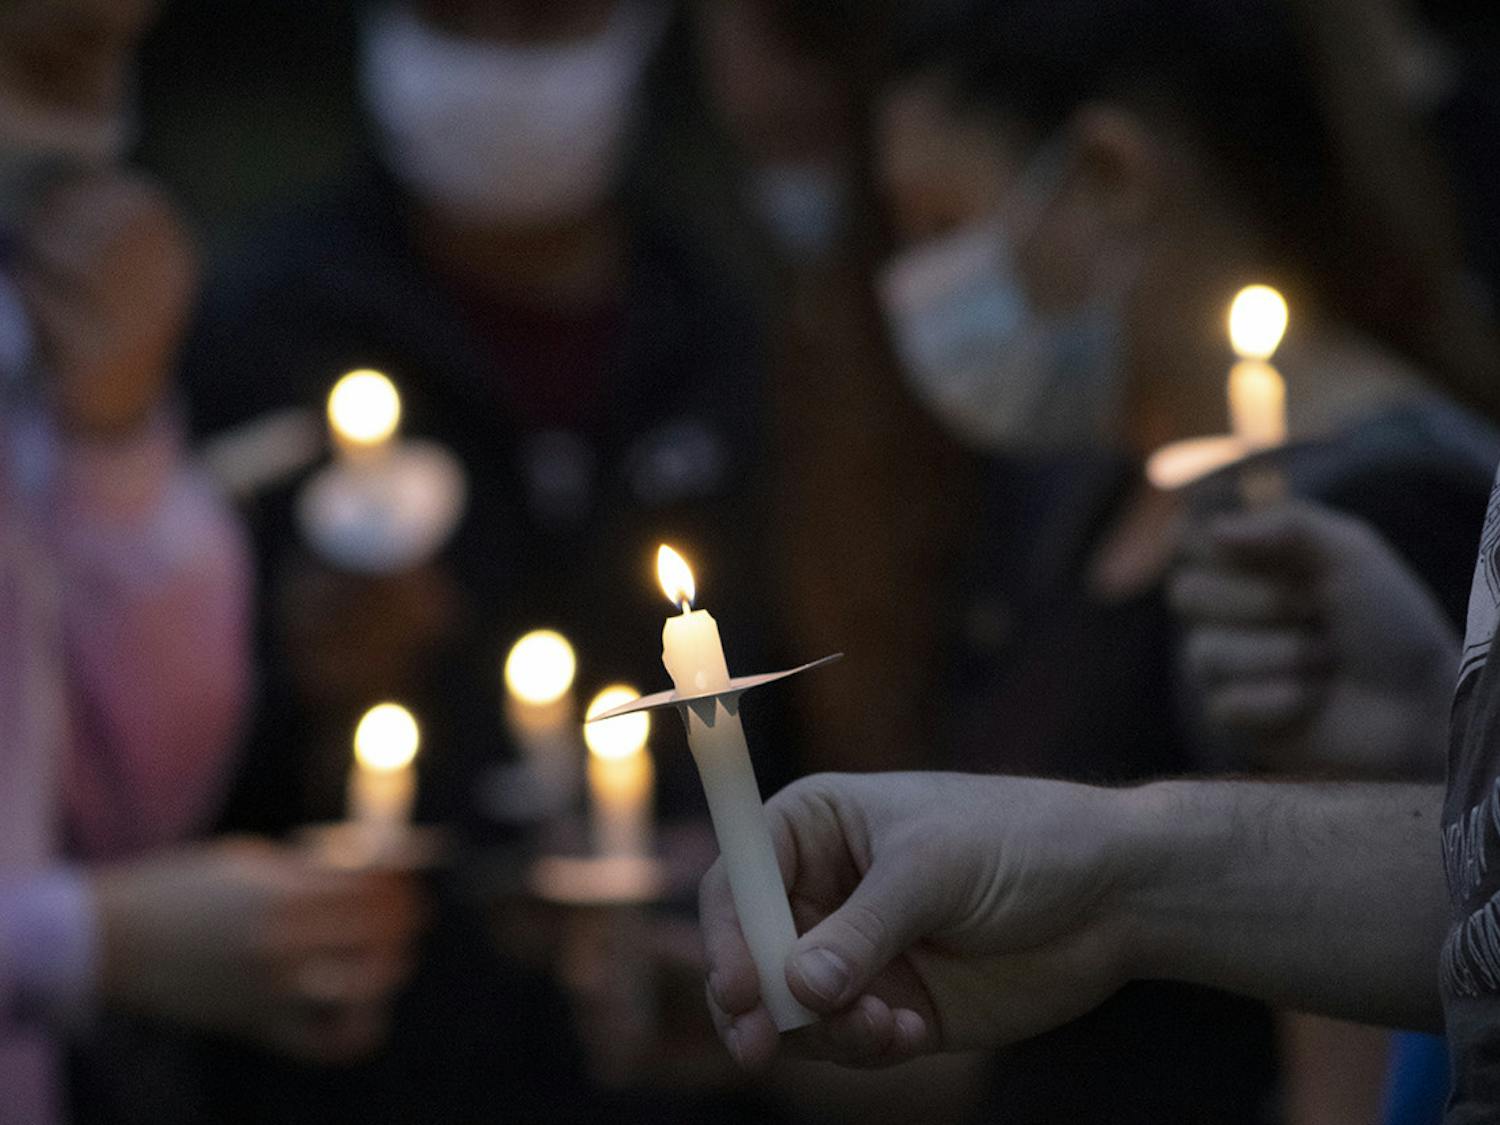 About 80 people hold candles and gather during a vigil on Sunday, Feb. 14, 2021 for those killed in the Marjory Stoneman Douglas High School shooting three years ago.